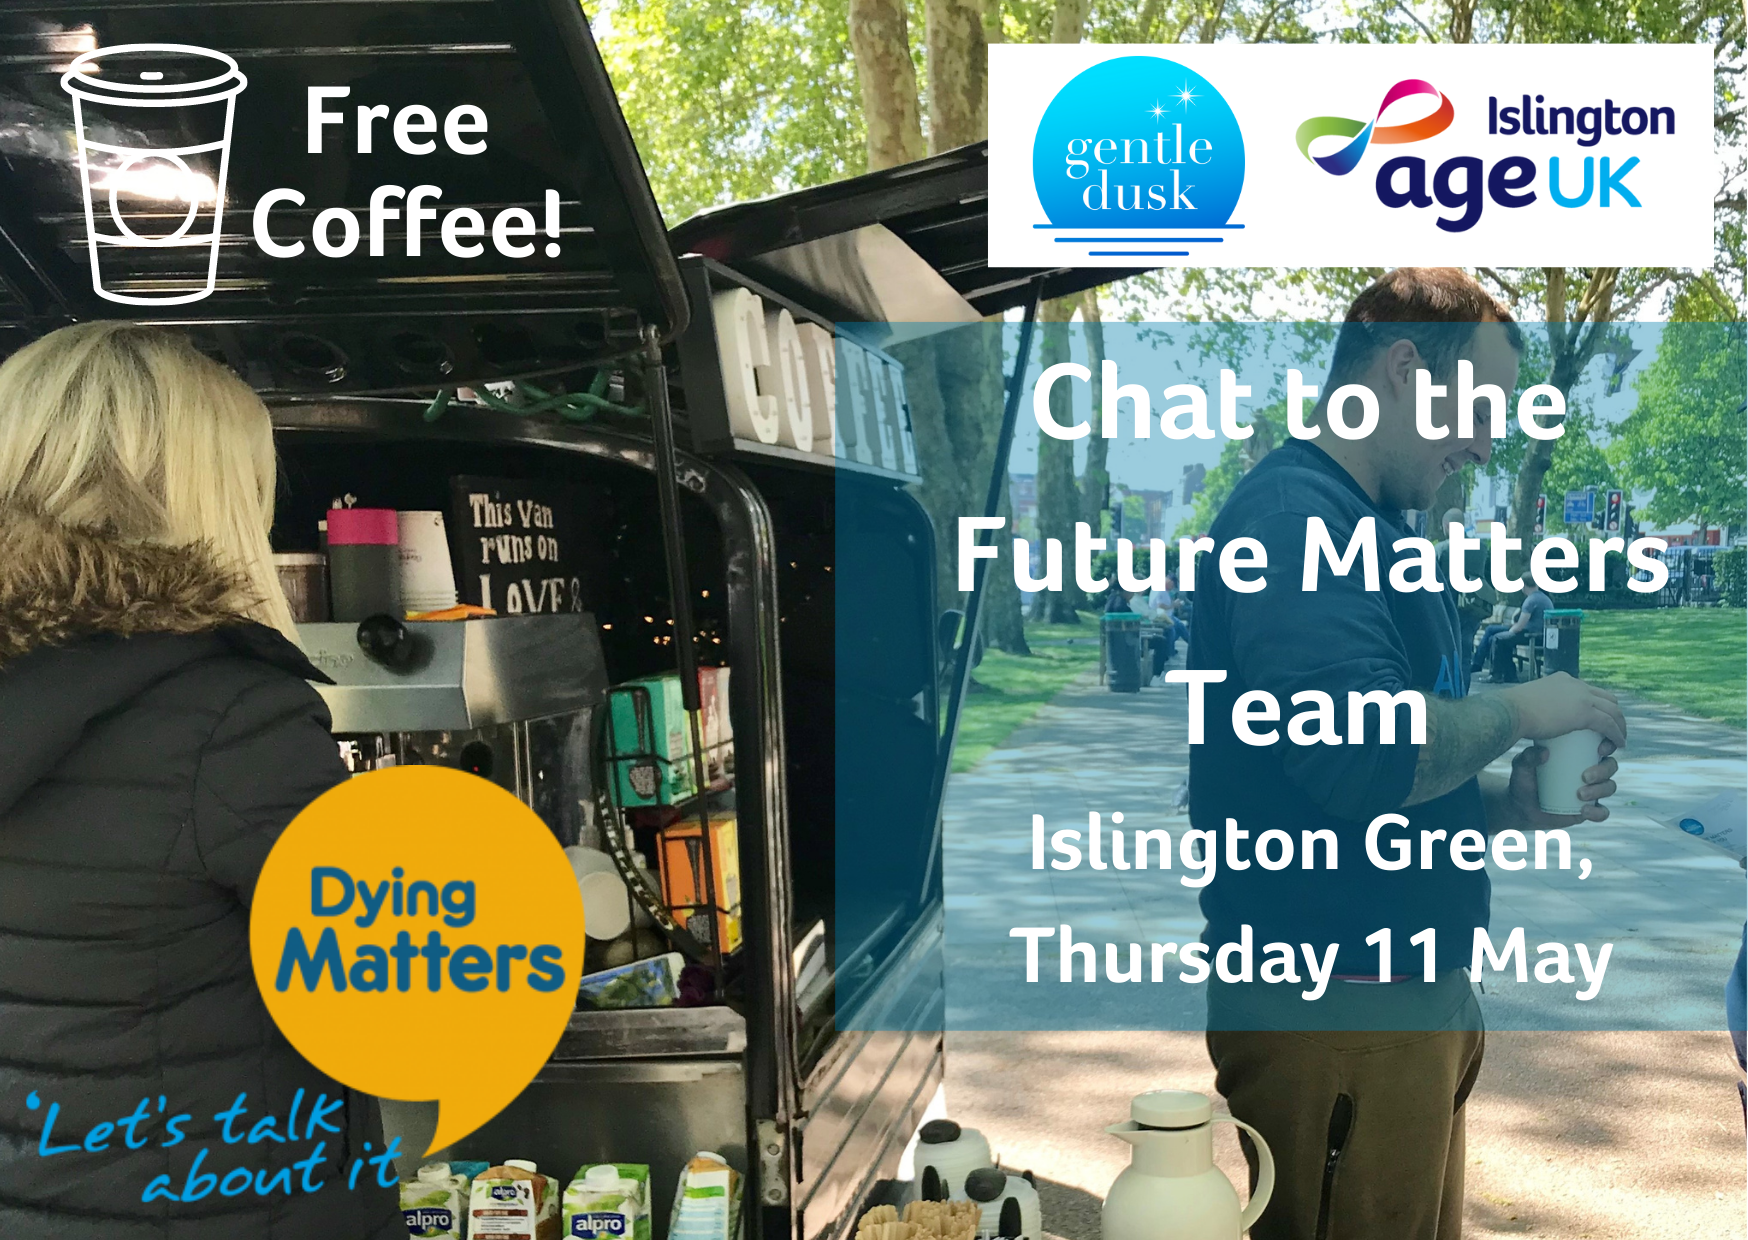 Coffee kiosk, free coffee, Chat to the Future Matters Team, Dying Matters Week 11 May